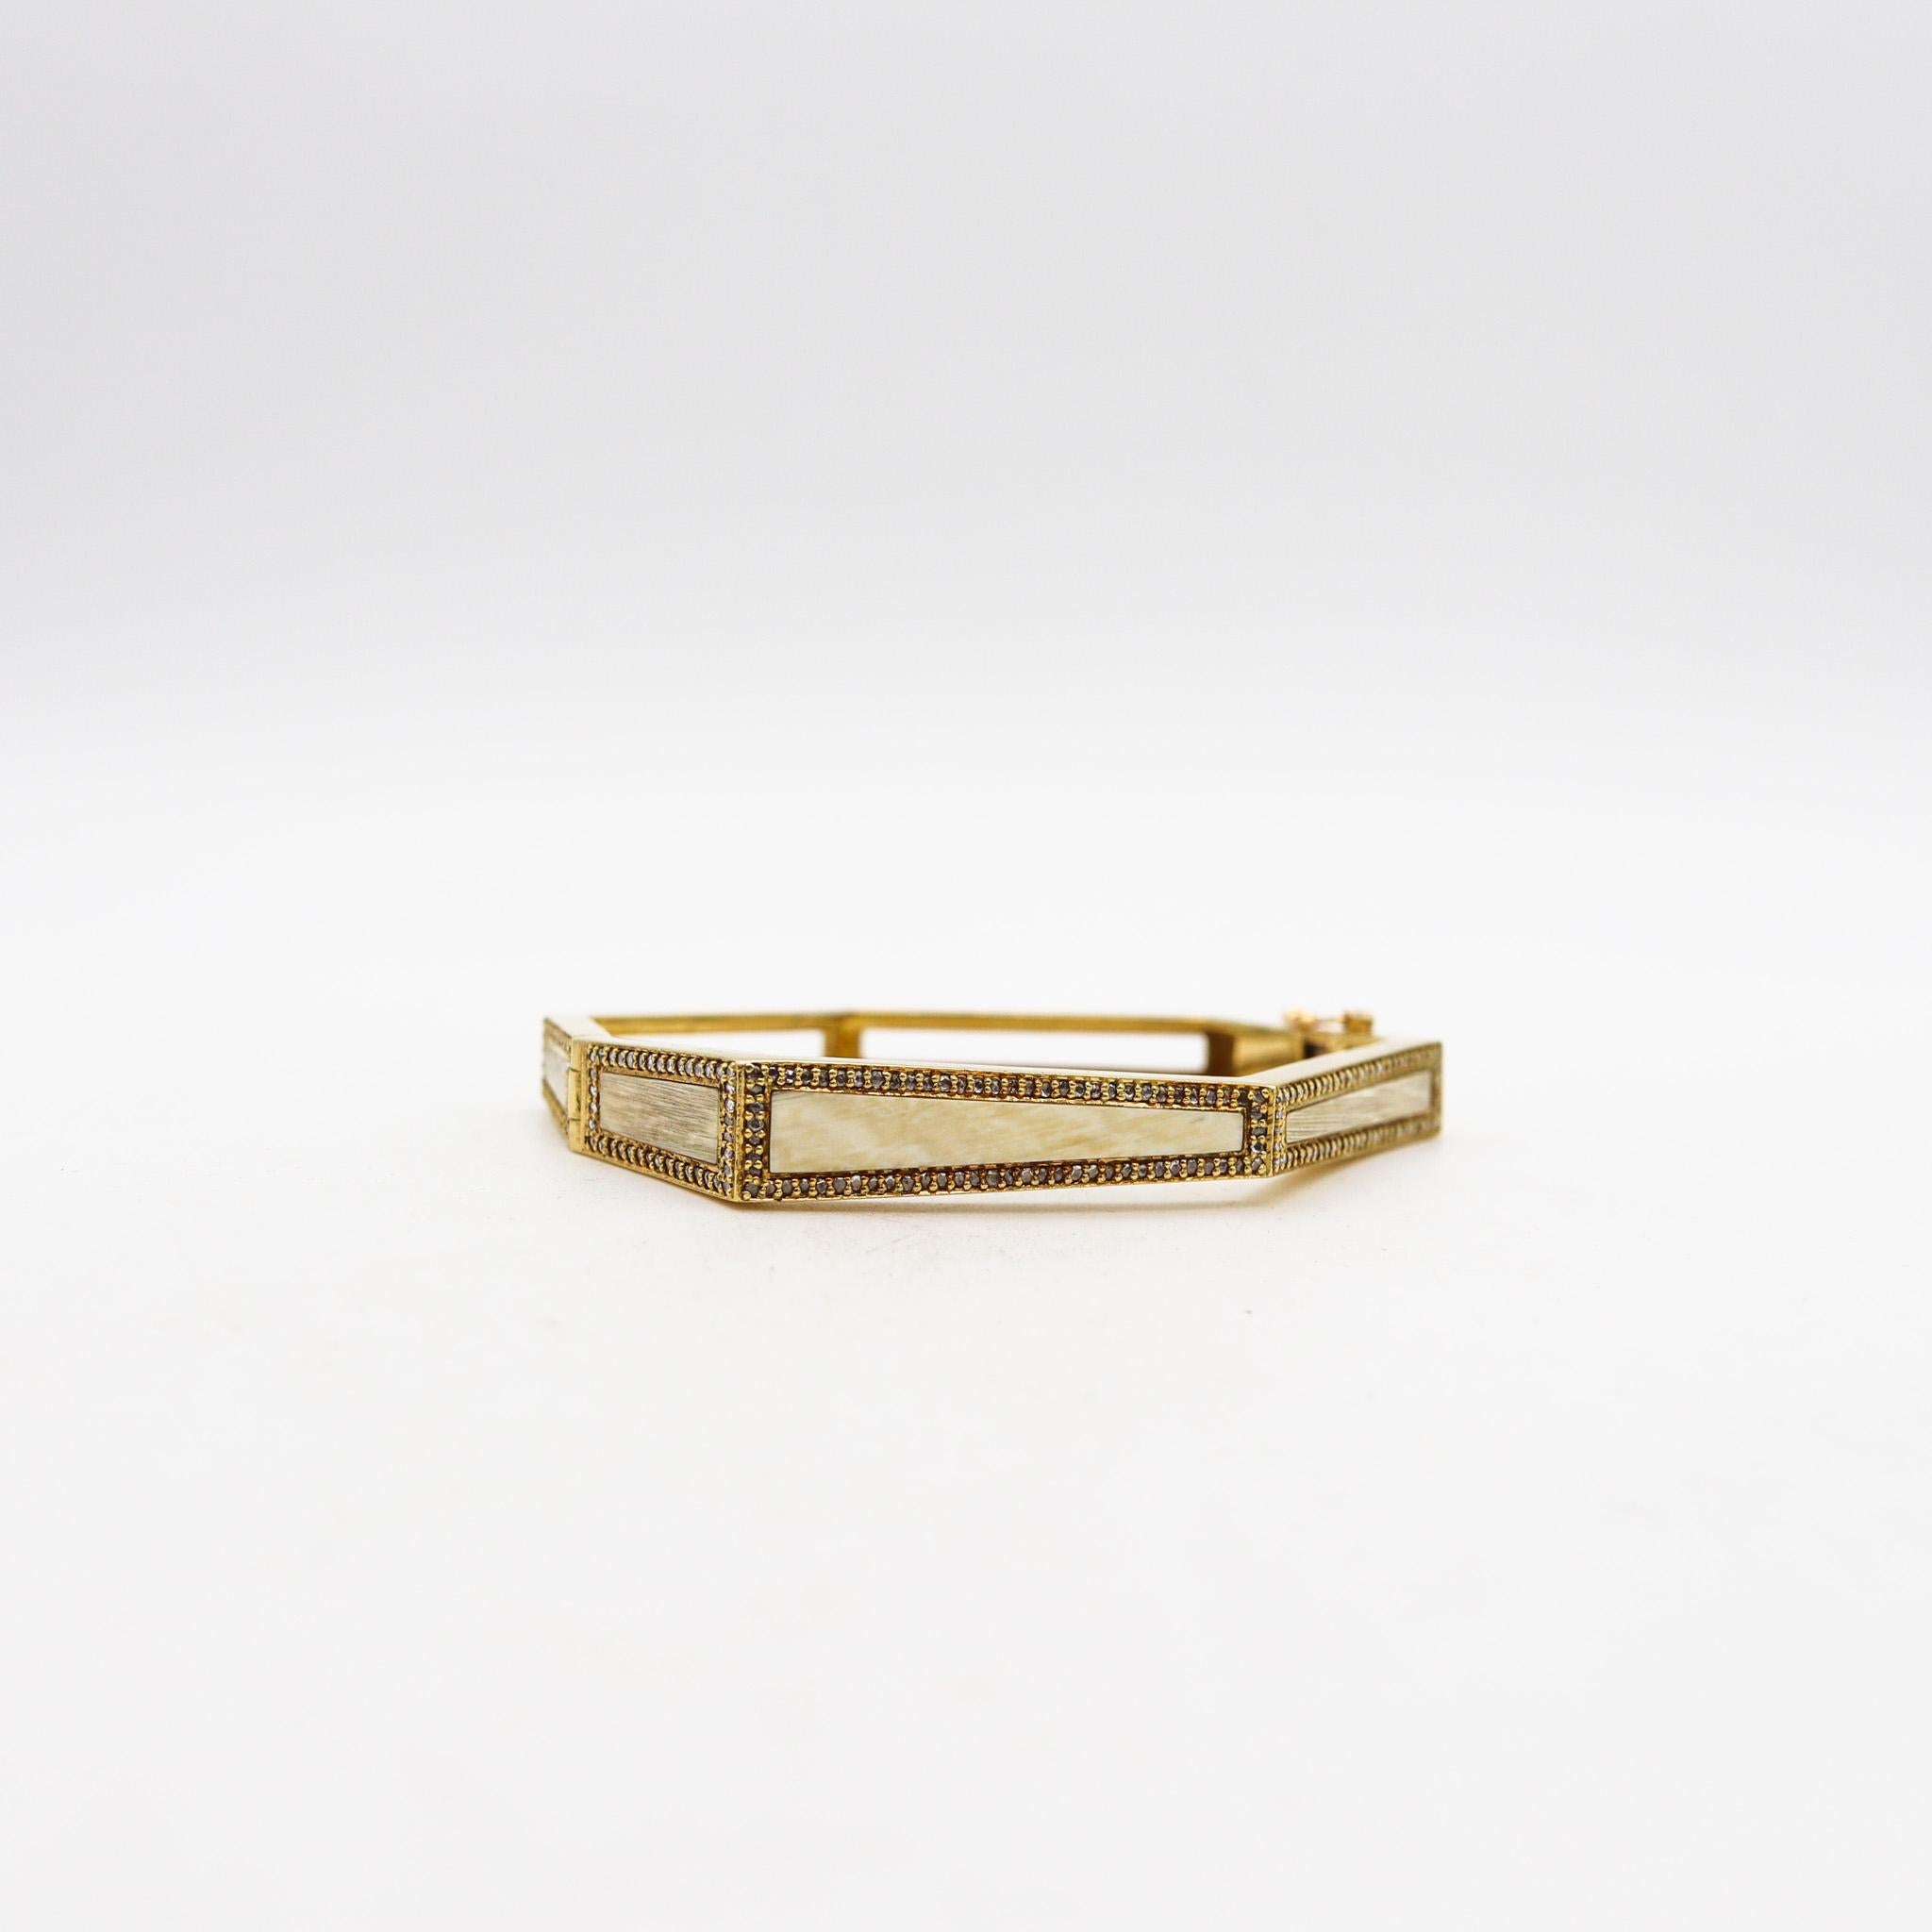 An heptagonal modernist bracelet.

Very unique one-of-a-kind sculptural bangle bracelet, created back in the 1970. This ultra modernist bangle has been crafted with an heptagonal geometric shape in solid yellow gold of 18 karats with high polished